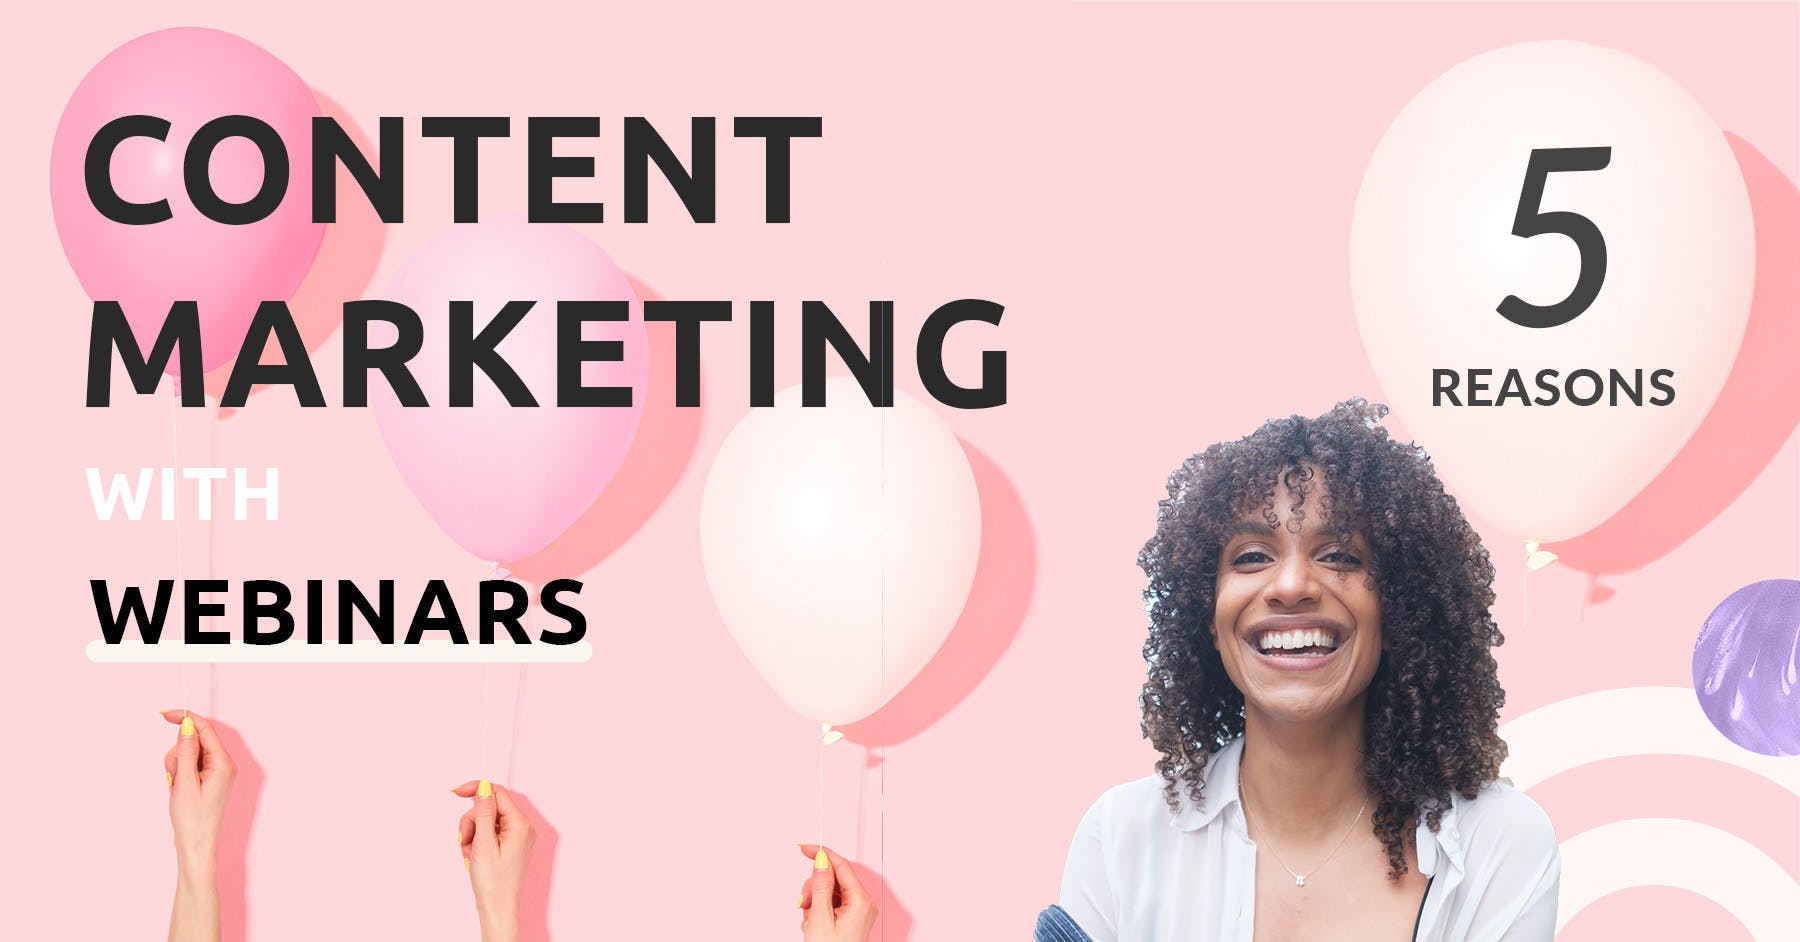 Content marketing and growth with webinars - great reasons to start